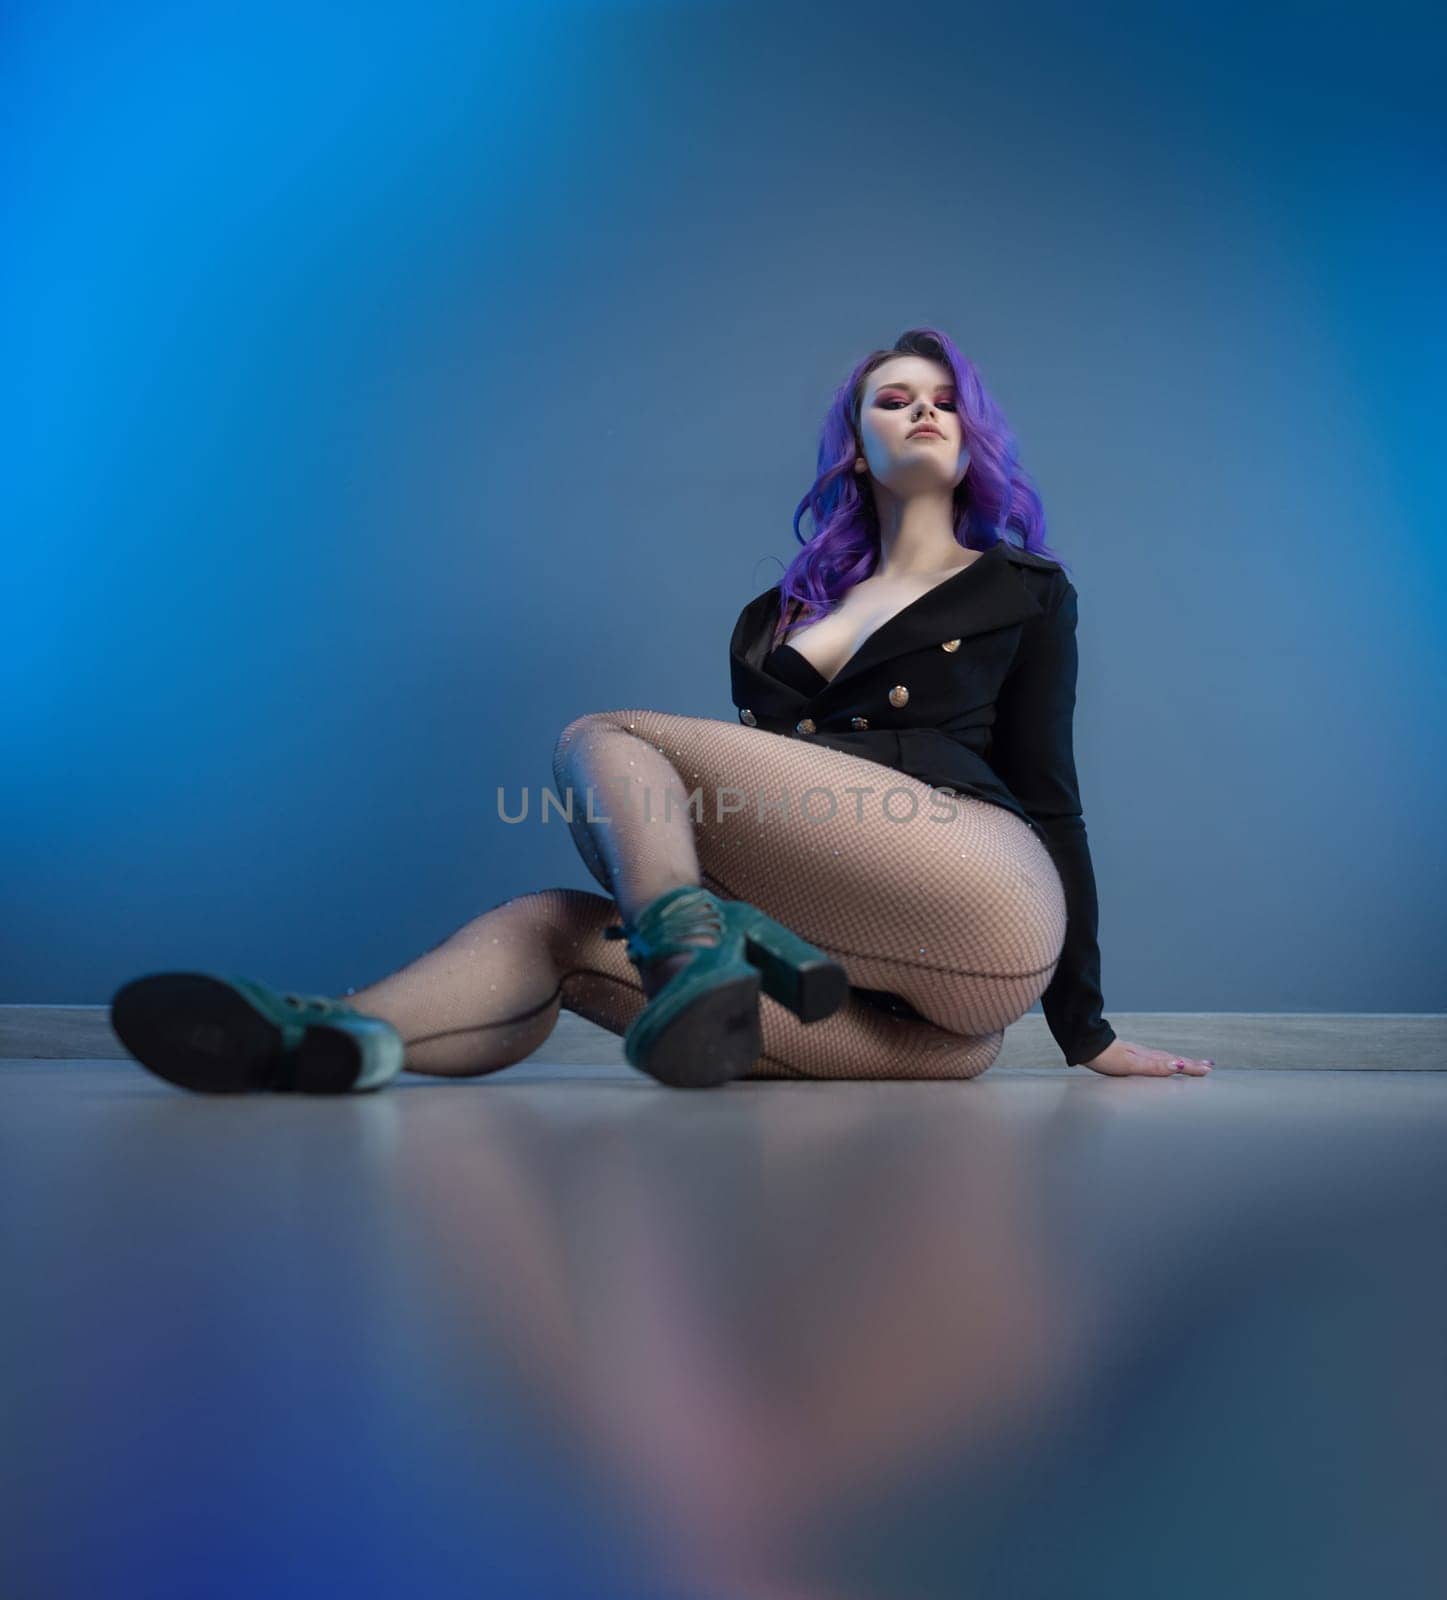 sexy girl in a fashionable jacket and with purple hair poses erotically in her underwear on a blue background of a copy paste